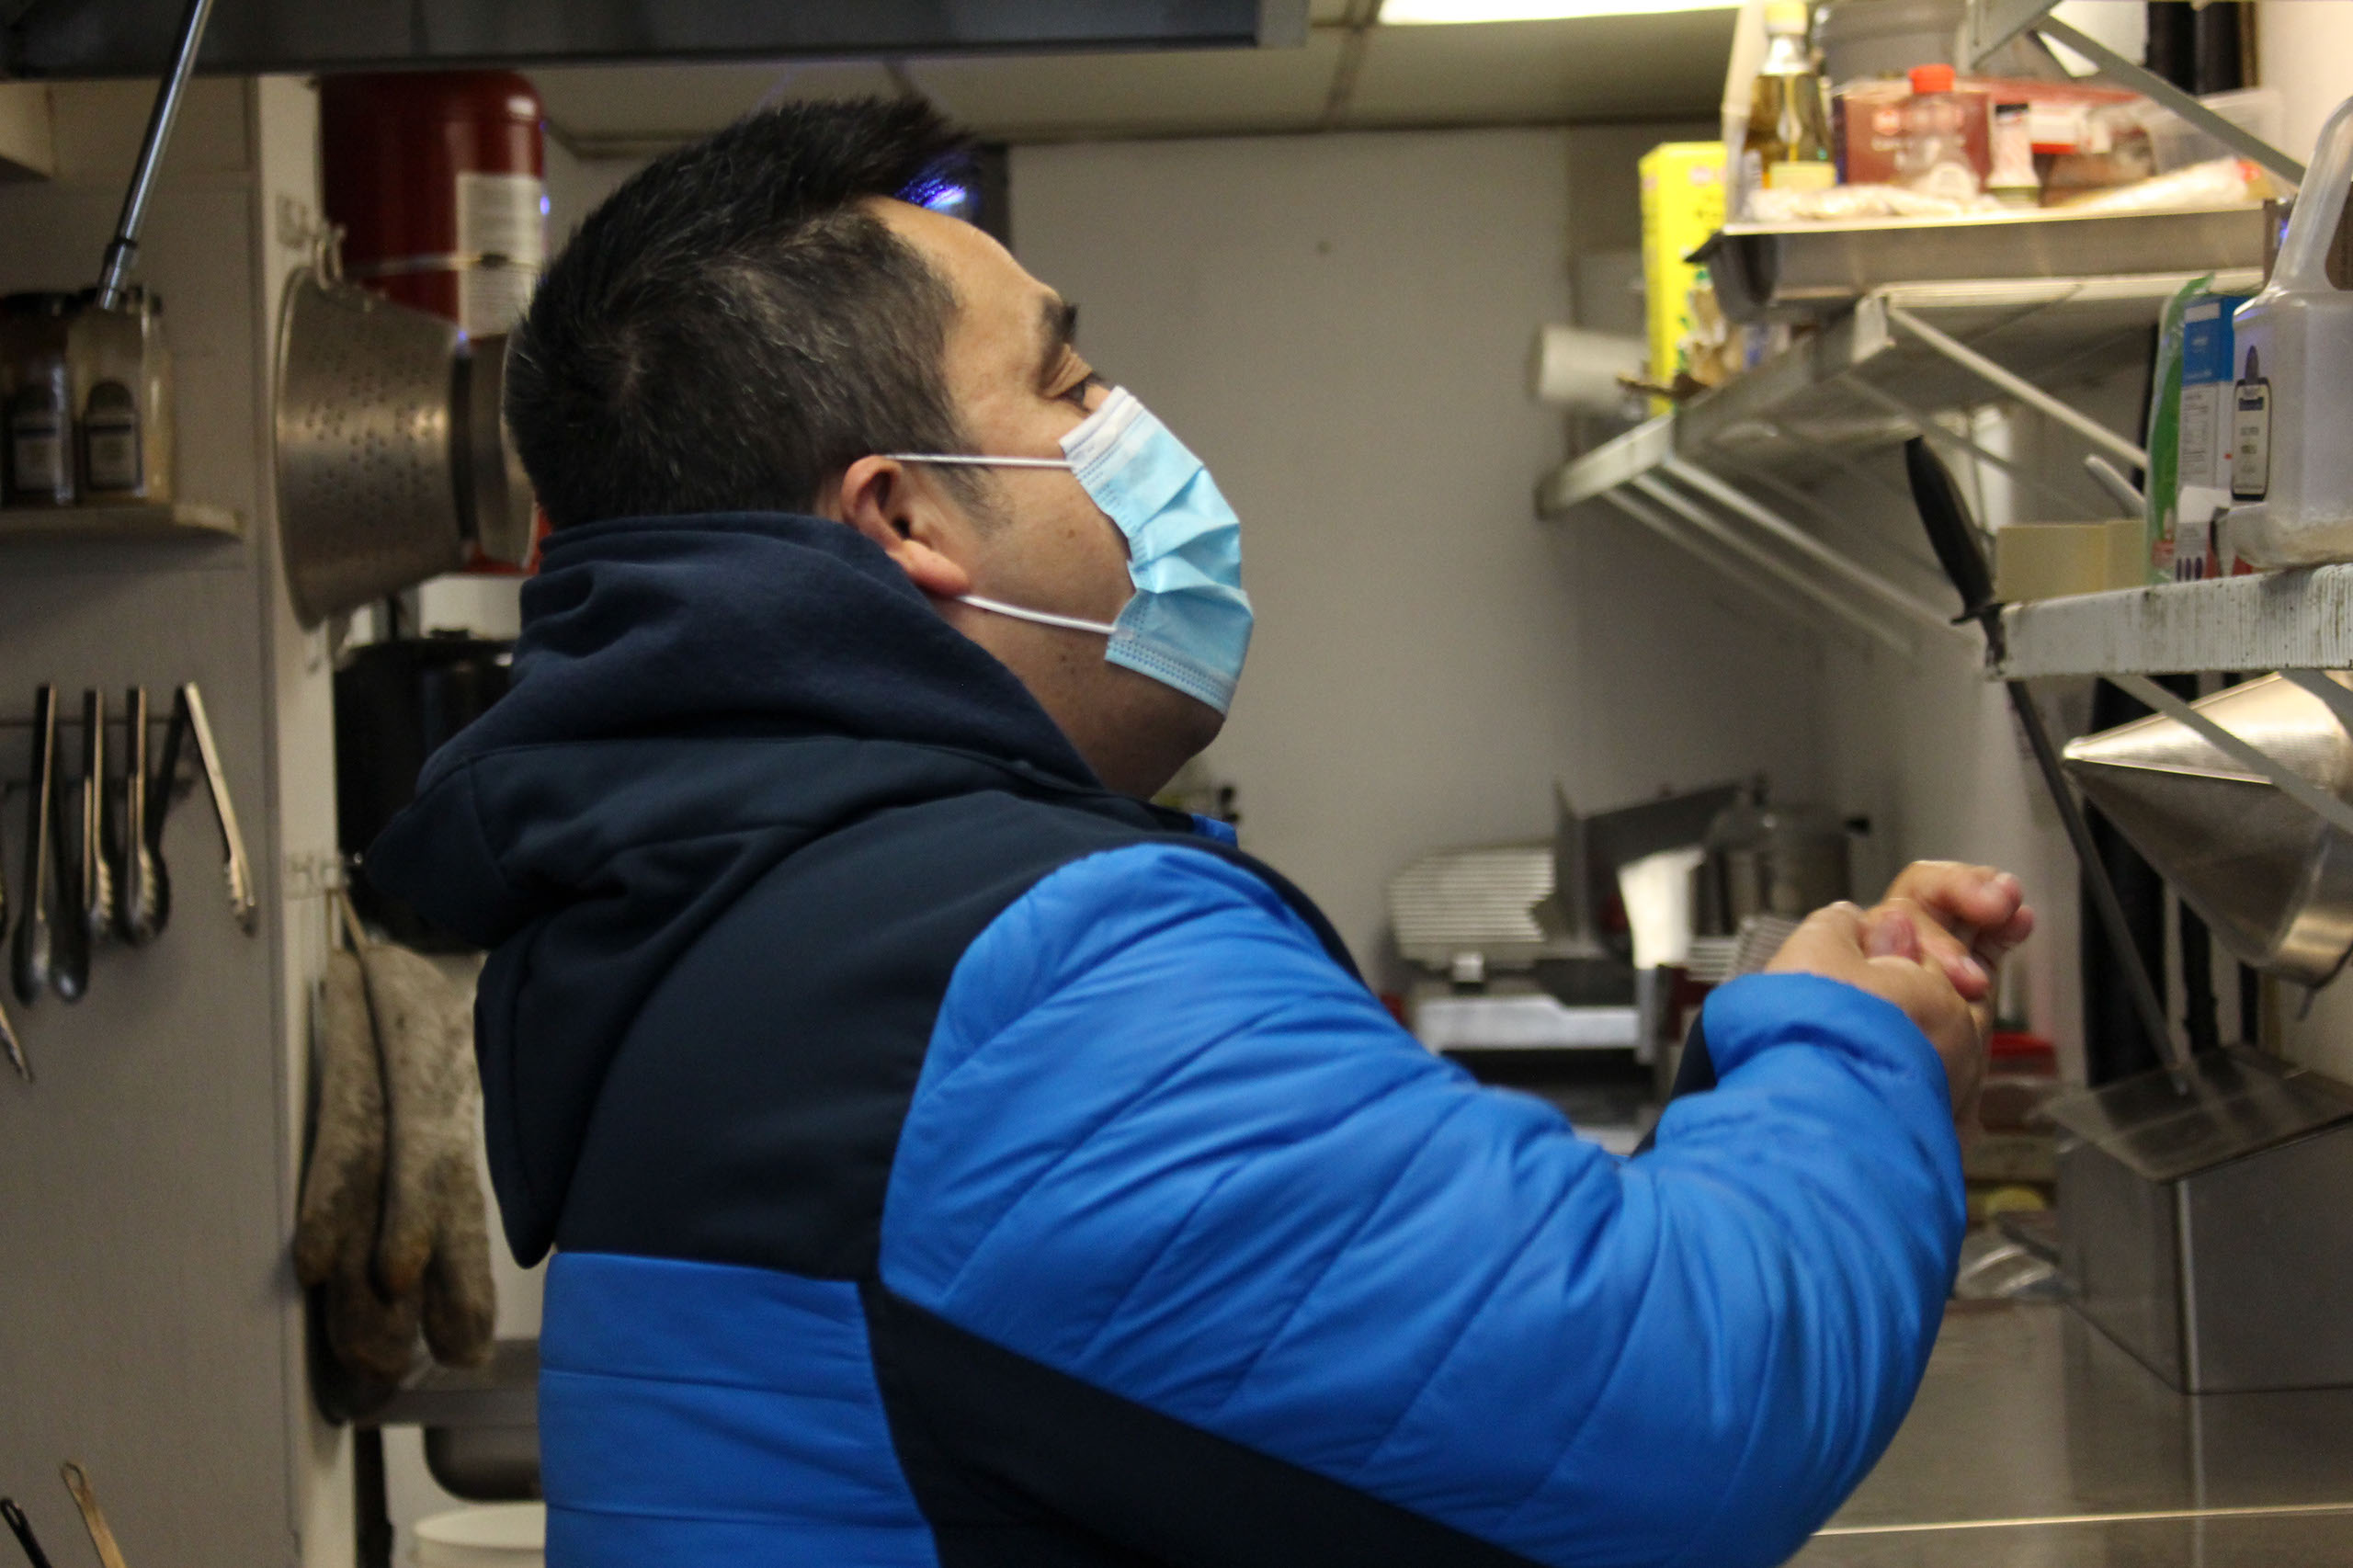 Francisco Melgar applies hand sanitizer before putting on gloves in the kitchen of Bottlescrew Bill’s before starting his cleaning duties in Calgary on April. 15, 2021. Melgar was laid off officially from the Sheraton Eau Claire, the place he worked for for 15 years, back in October of 2020, after being on a leave as a result of the COVID-19 pandemic. He was the assistant to the power engineer. (Photo by Alejandro Melgar/SAIT)